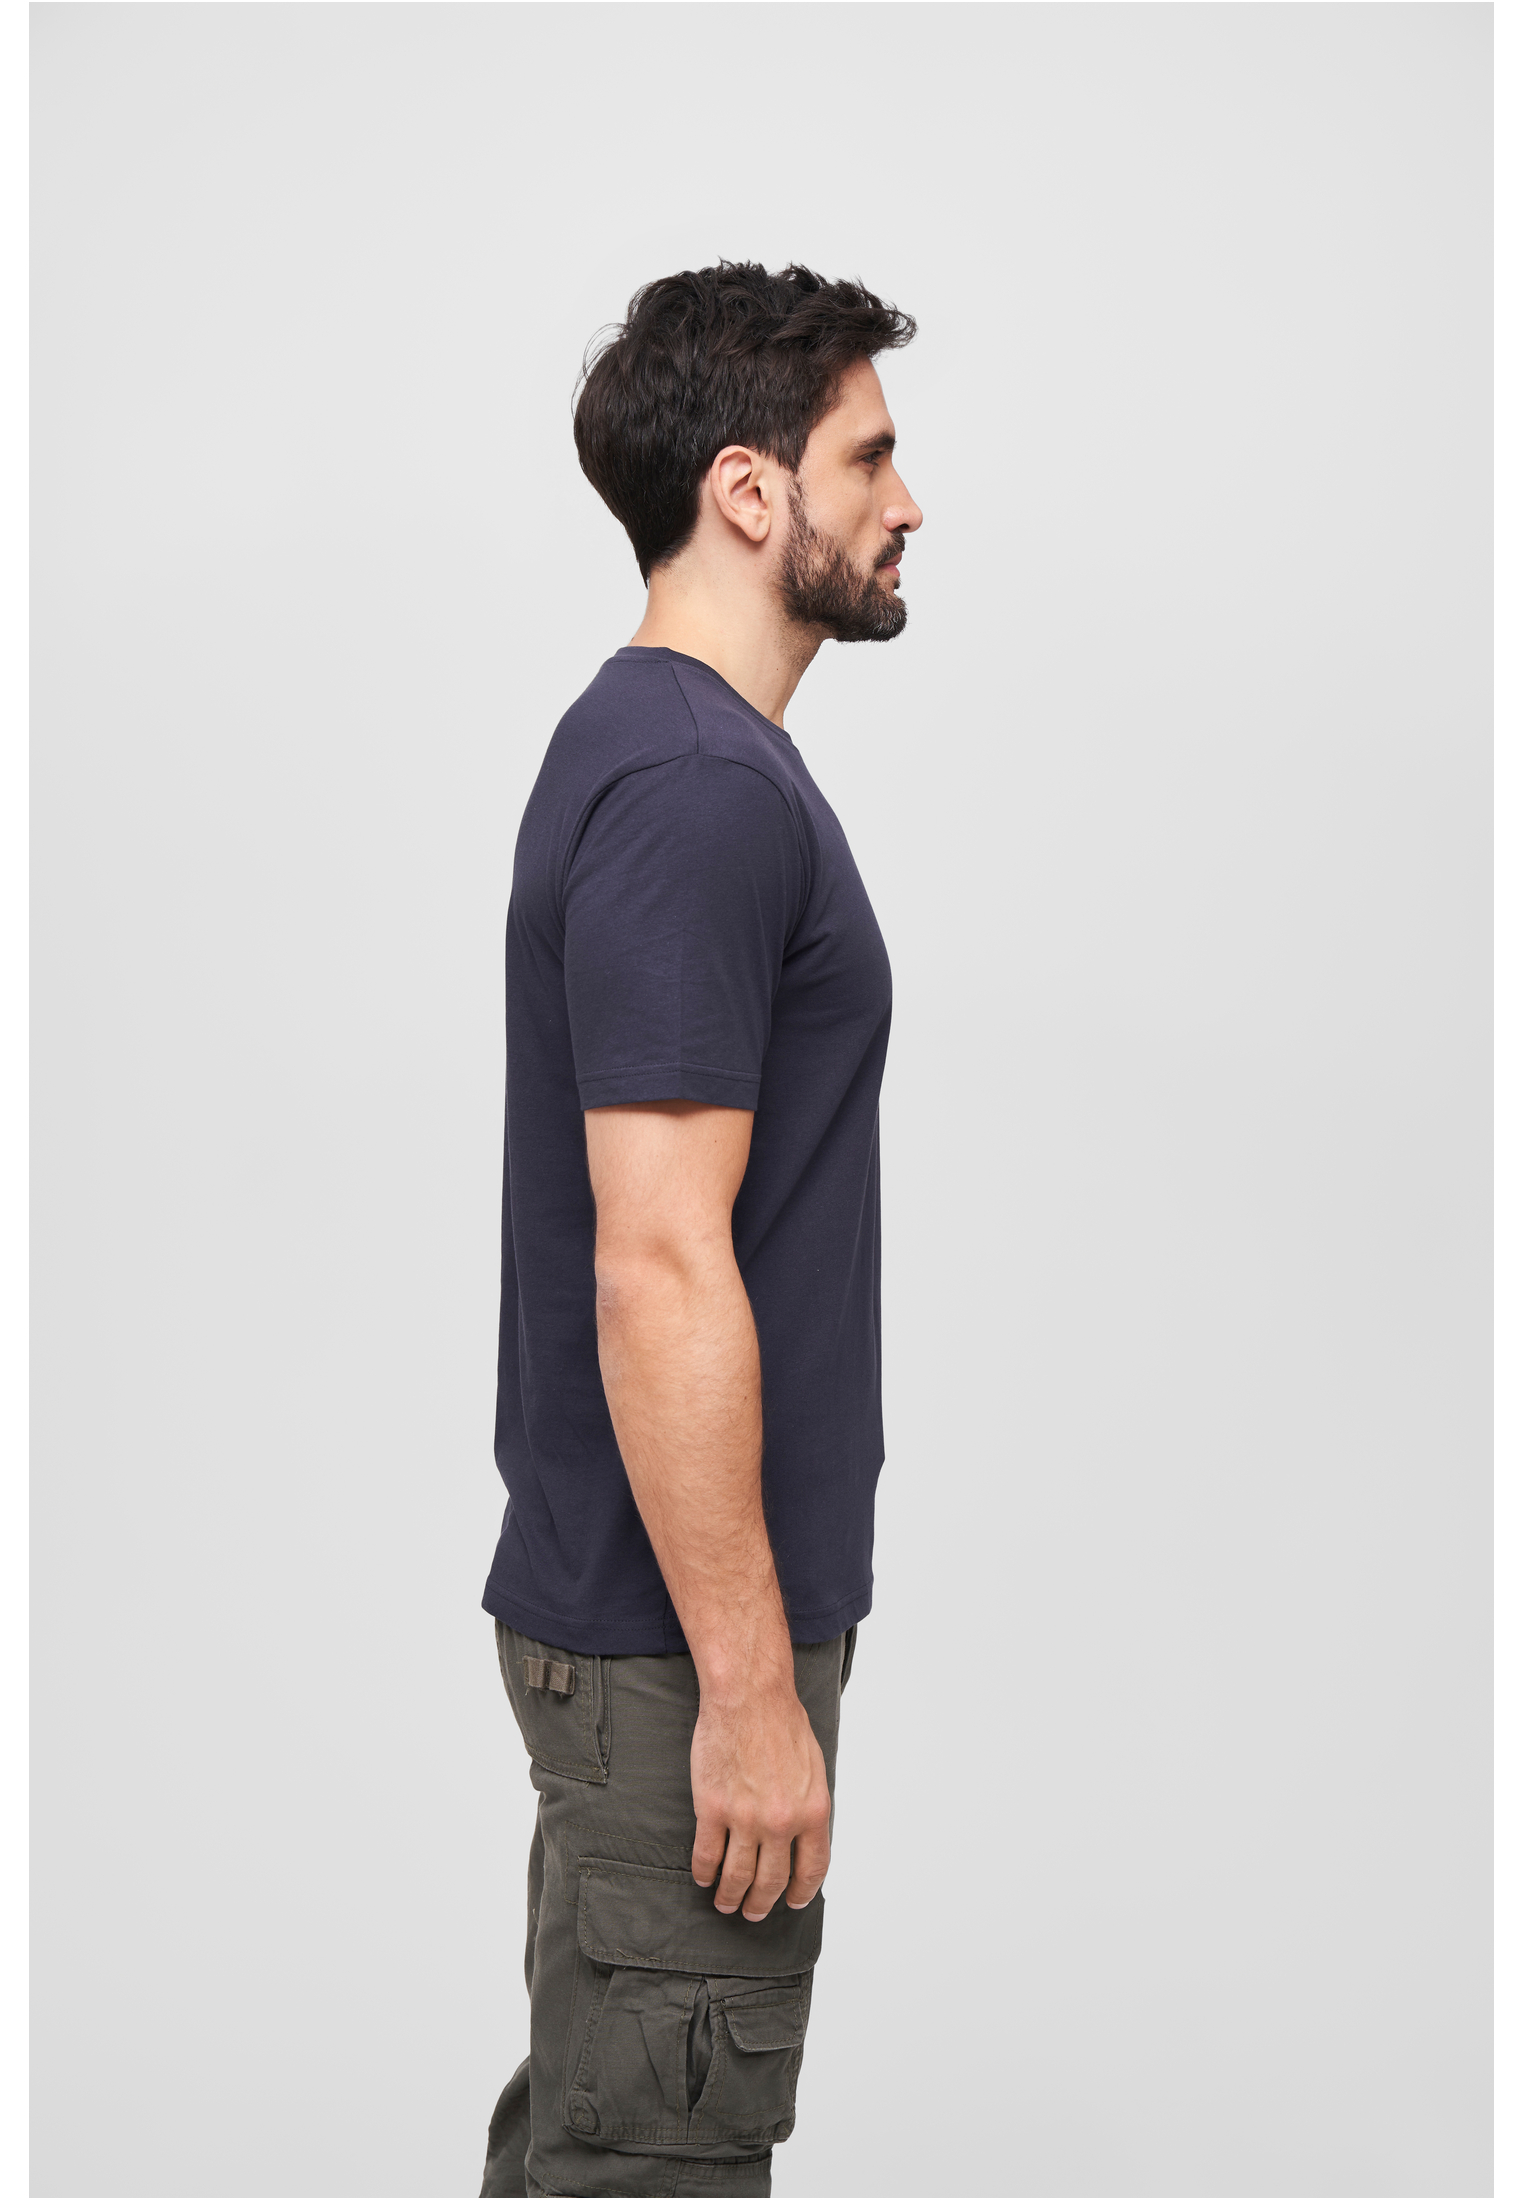 T-Shirts T-Shirt in Farbe navy